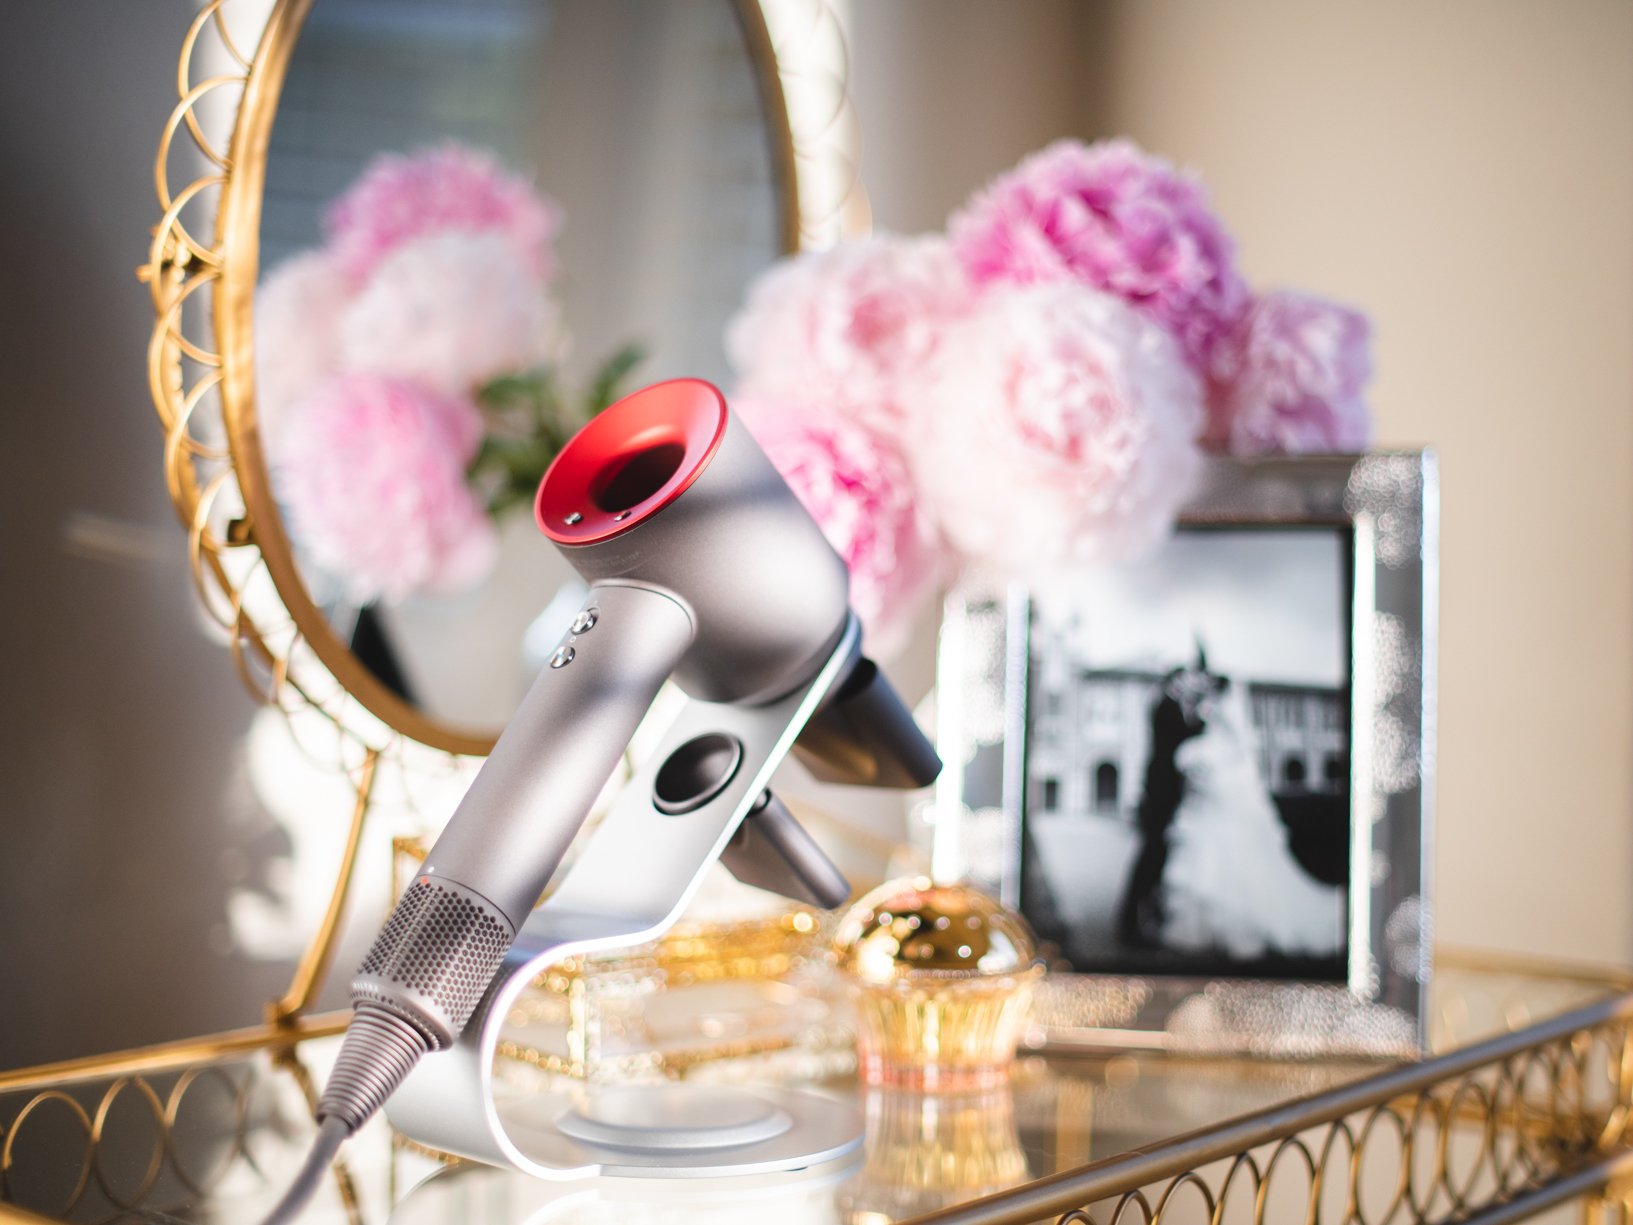 Dyson Supersonic Hairdryer: is it worth the hype? - Sun Kissed Blush